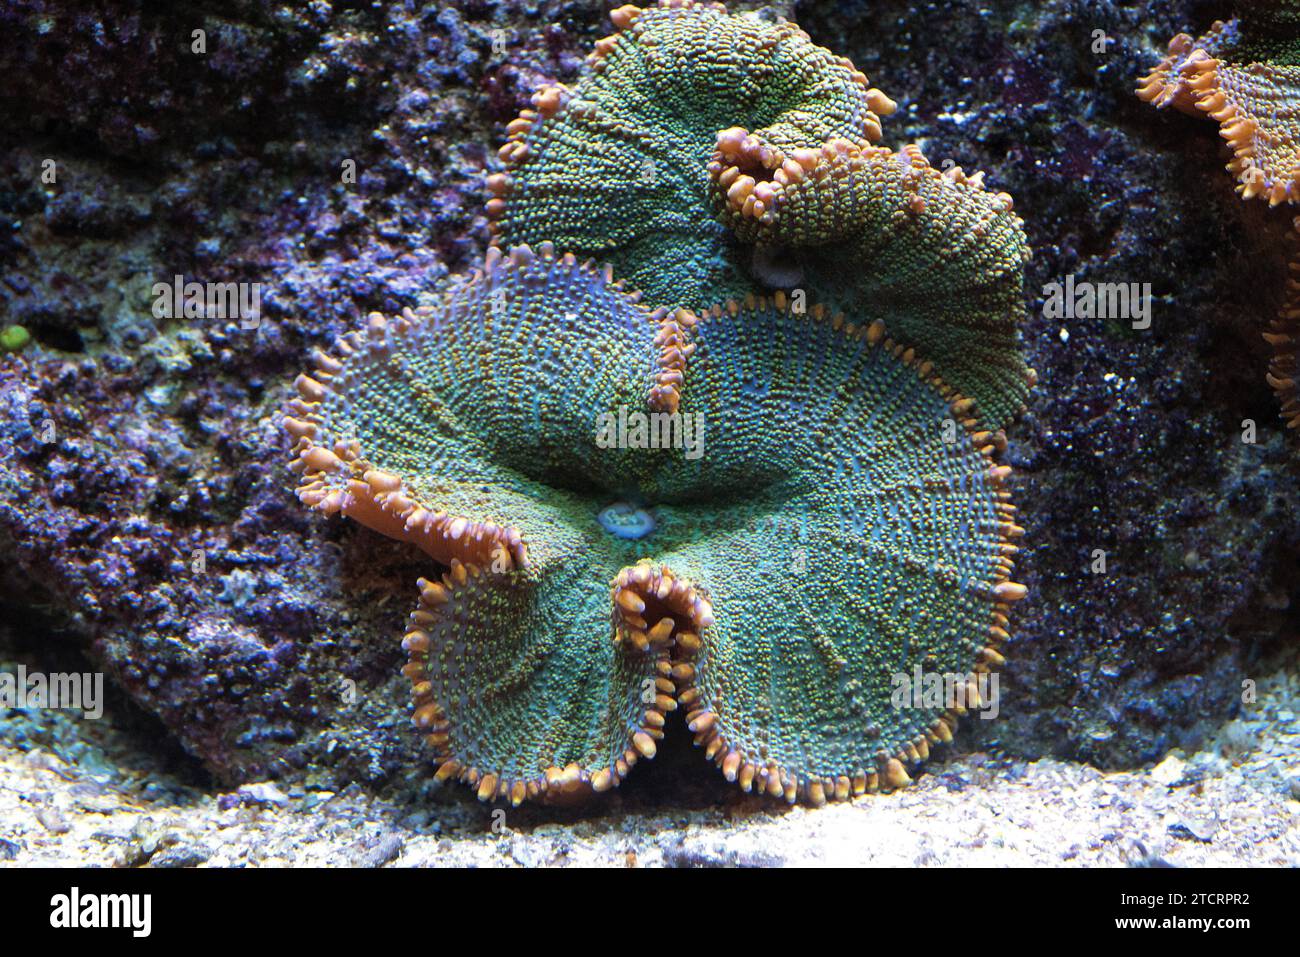 Disc anemone or mushroom anemone (Discosoma sp. or Actinodiscus sp.) are soft corals formed by individuals polyps that grow in colonies. Stock Photo